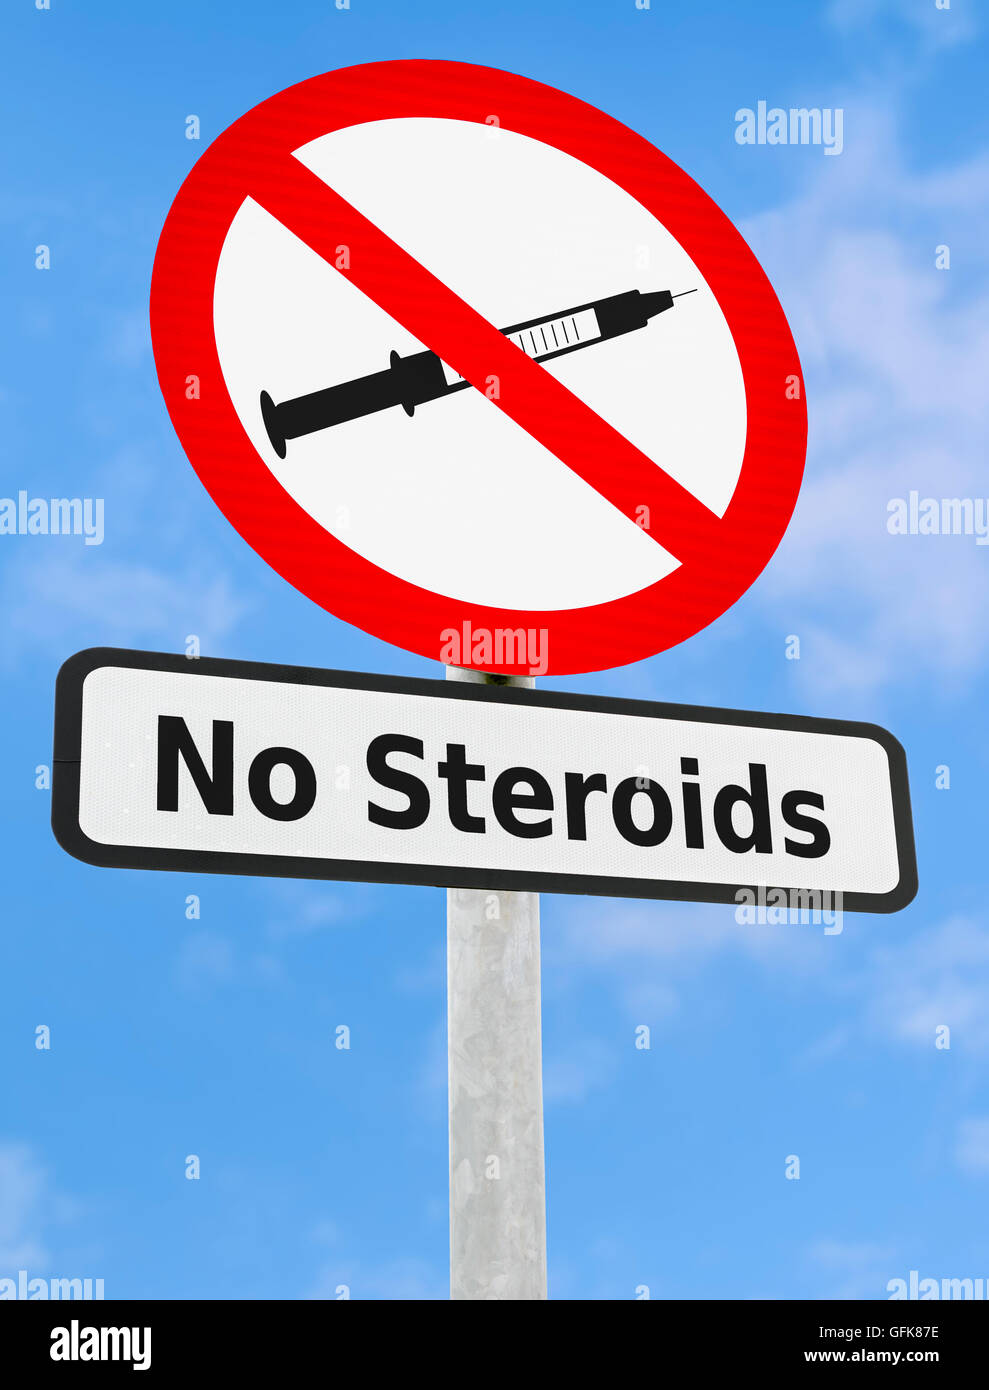 No Steroids sign showing a syringe and needle. Stock Photo